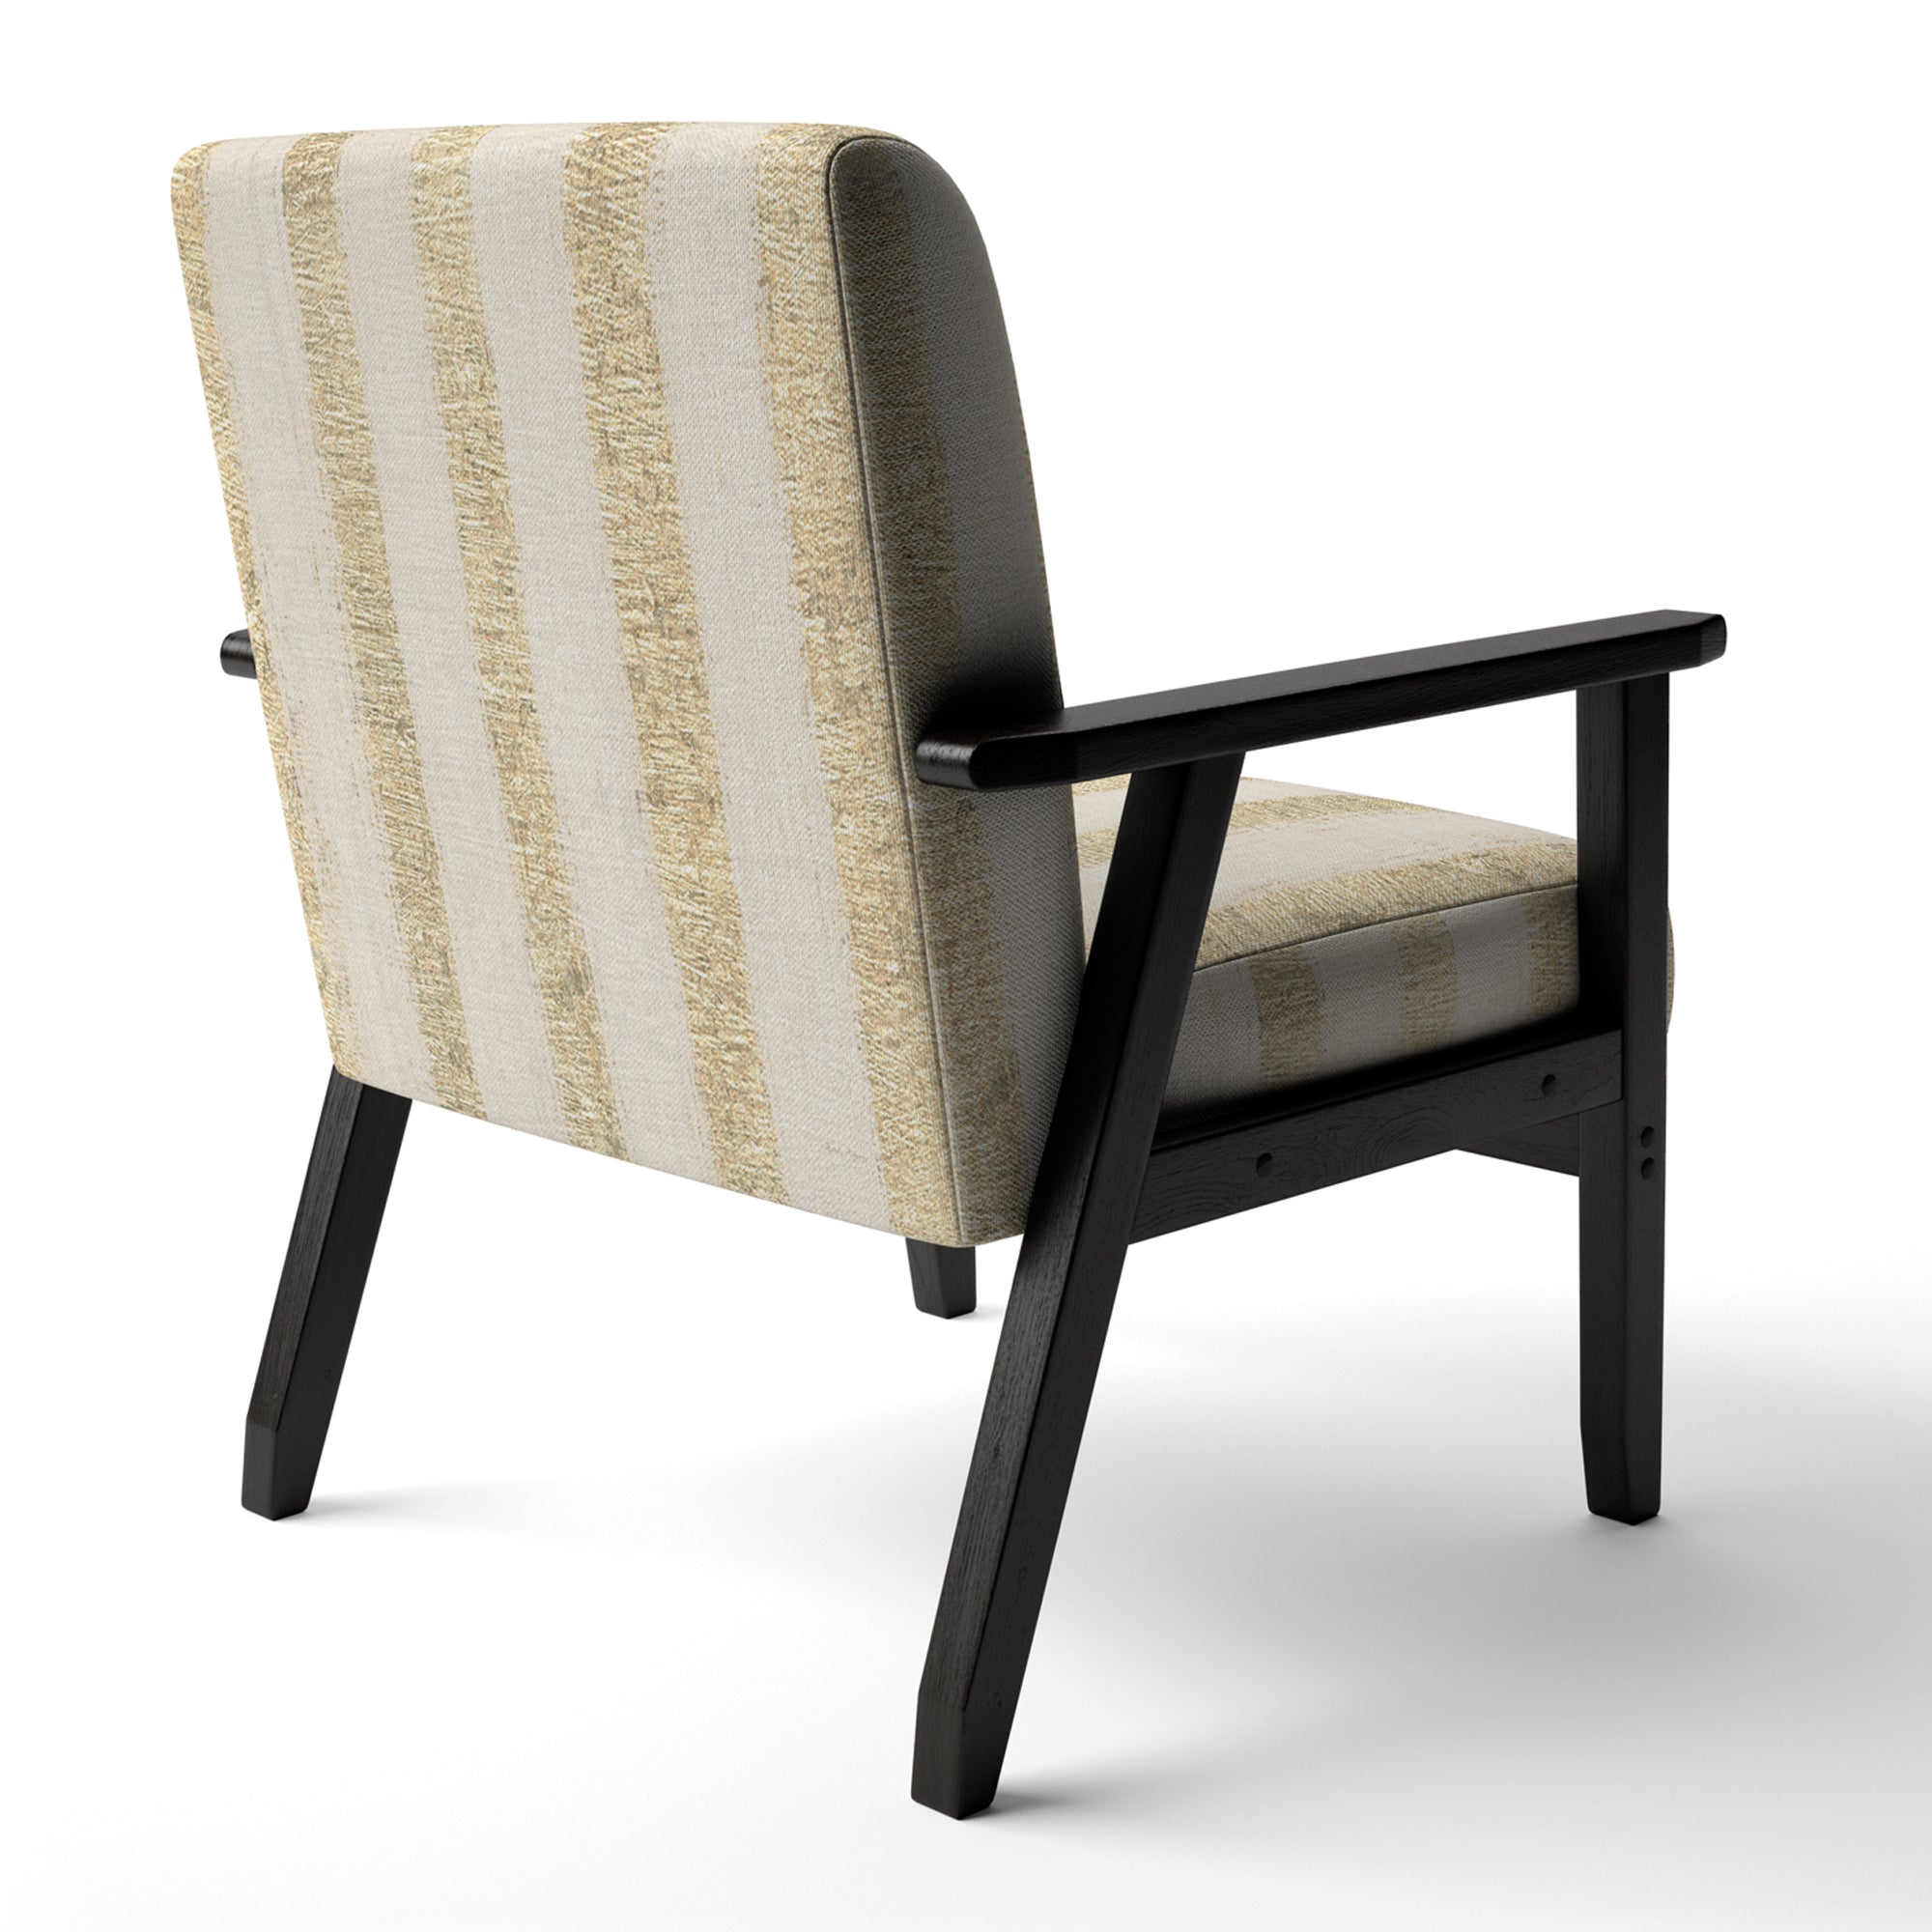 Gold Glam Stipes Pattern Modern Glam Accent Chair